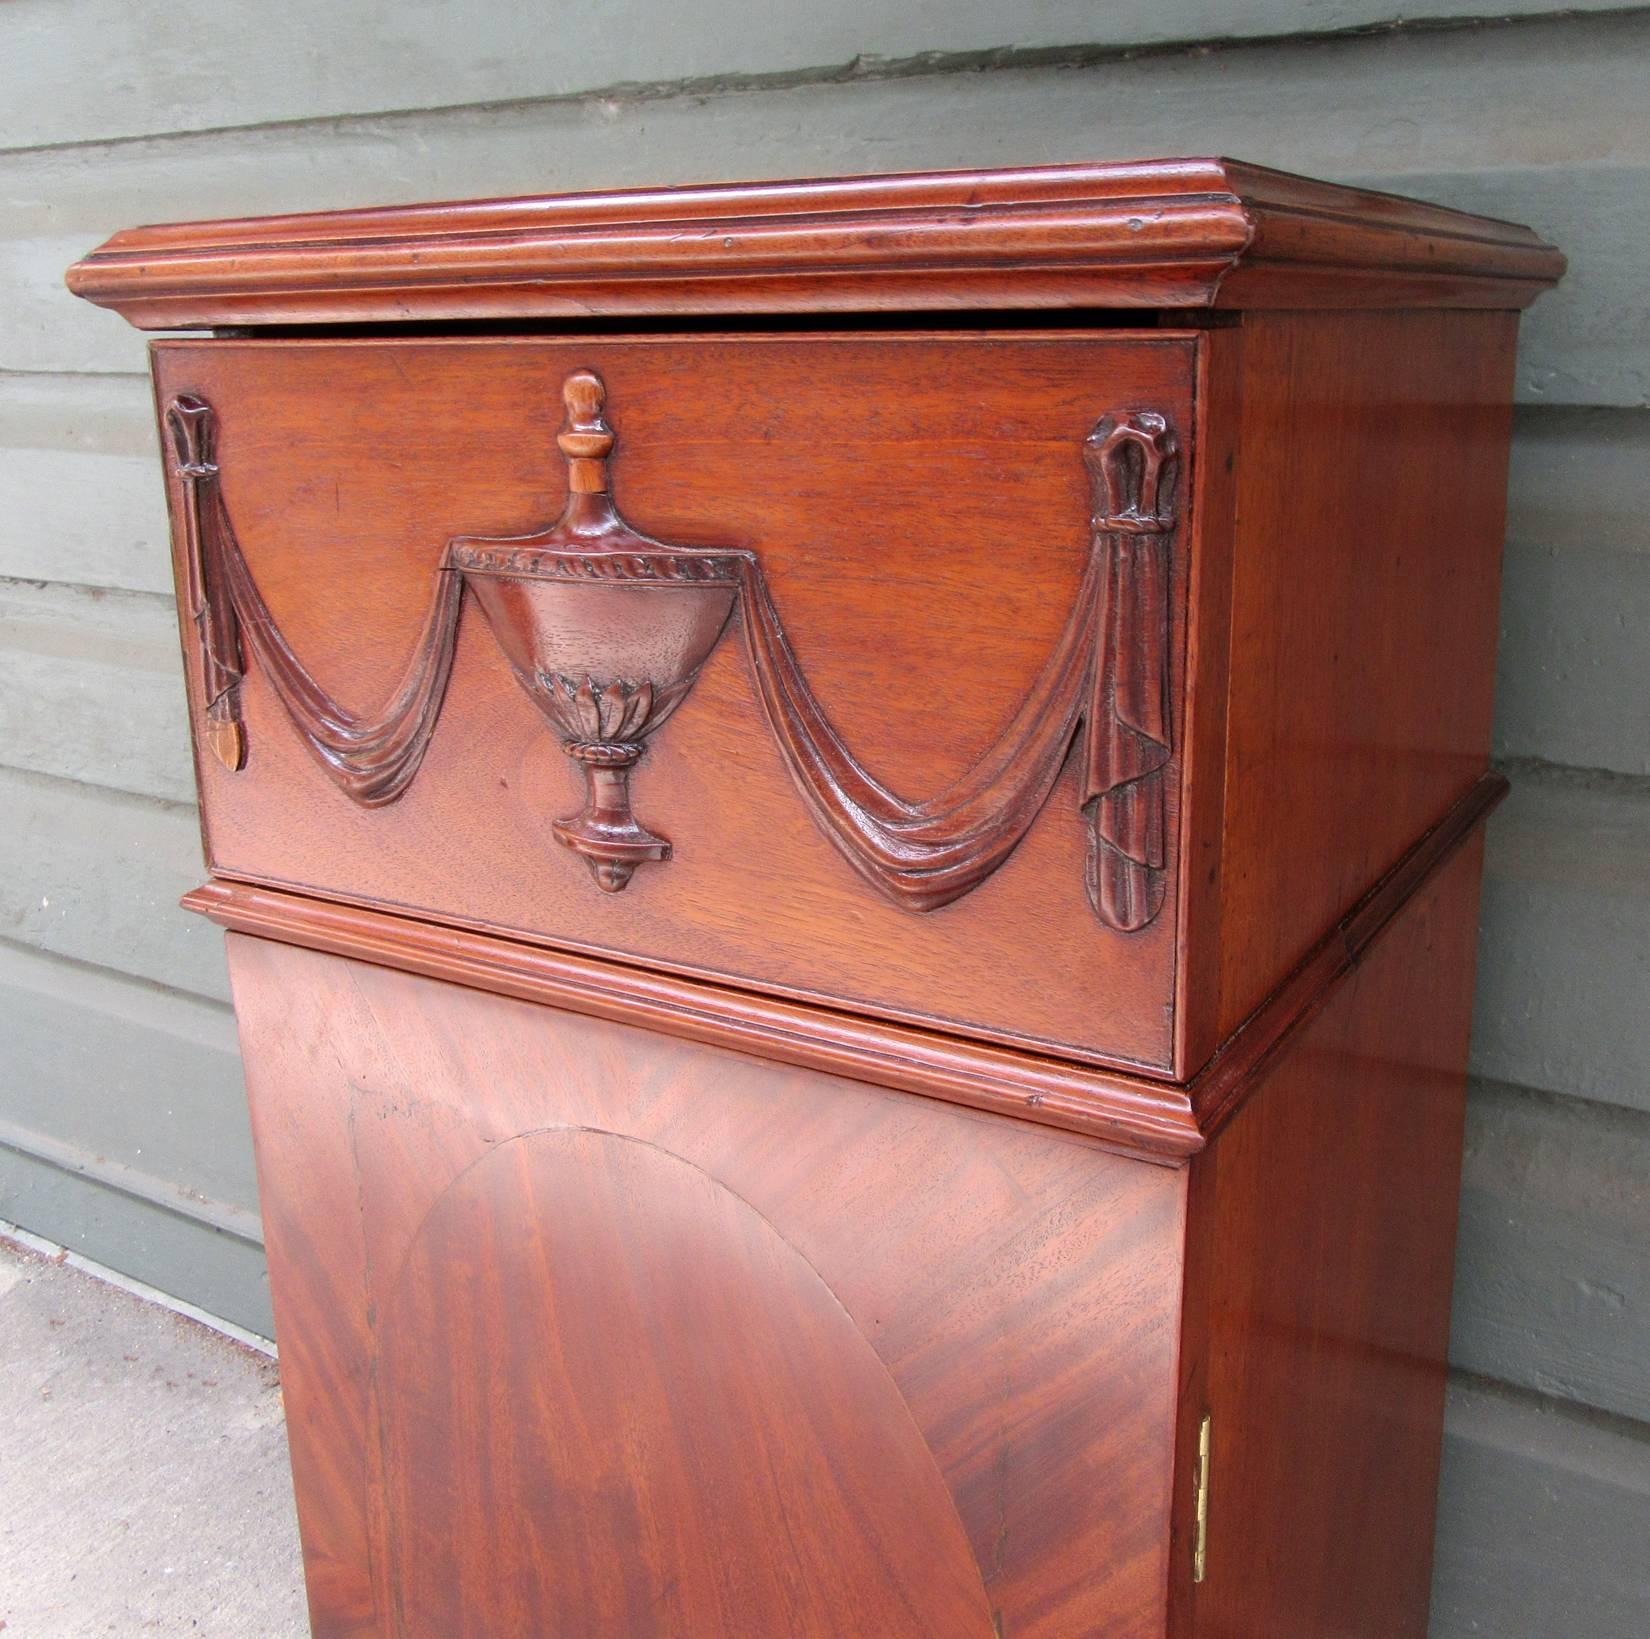 Early 19th Century English Regency Mahogany Pedestal Cabinet with Urn Carving 2